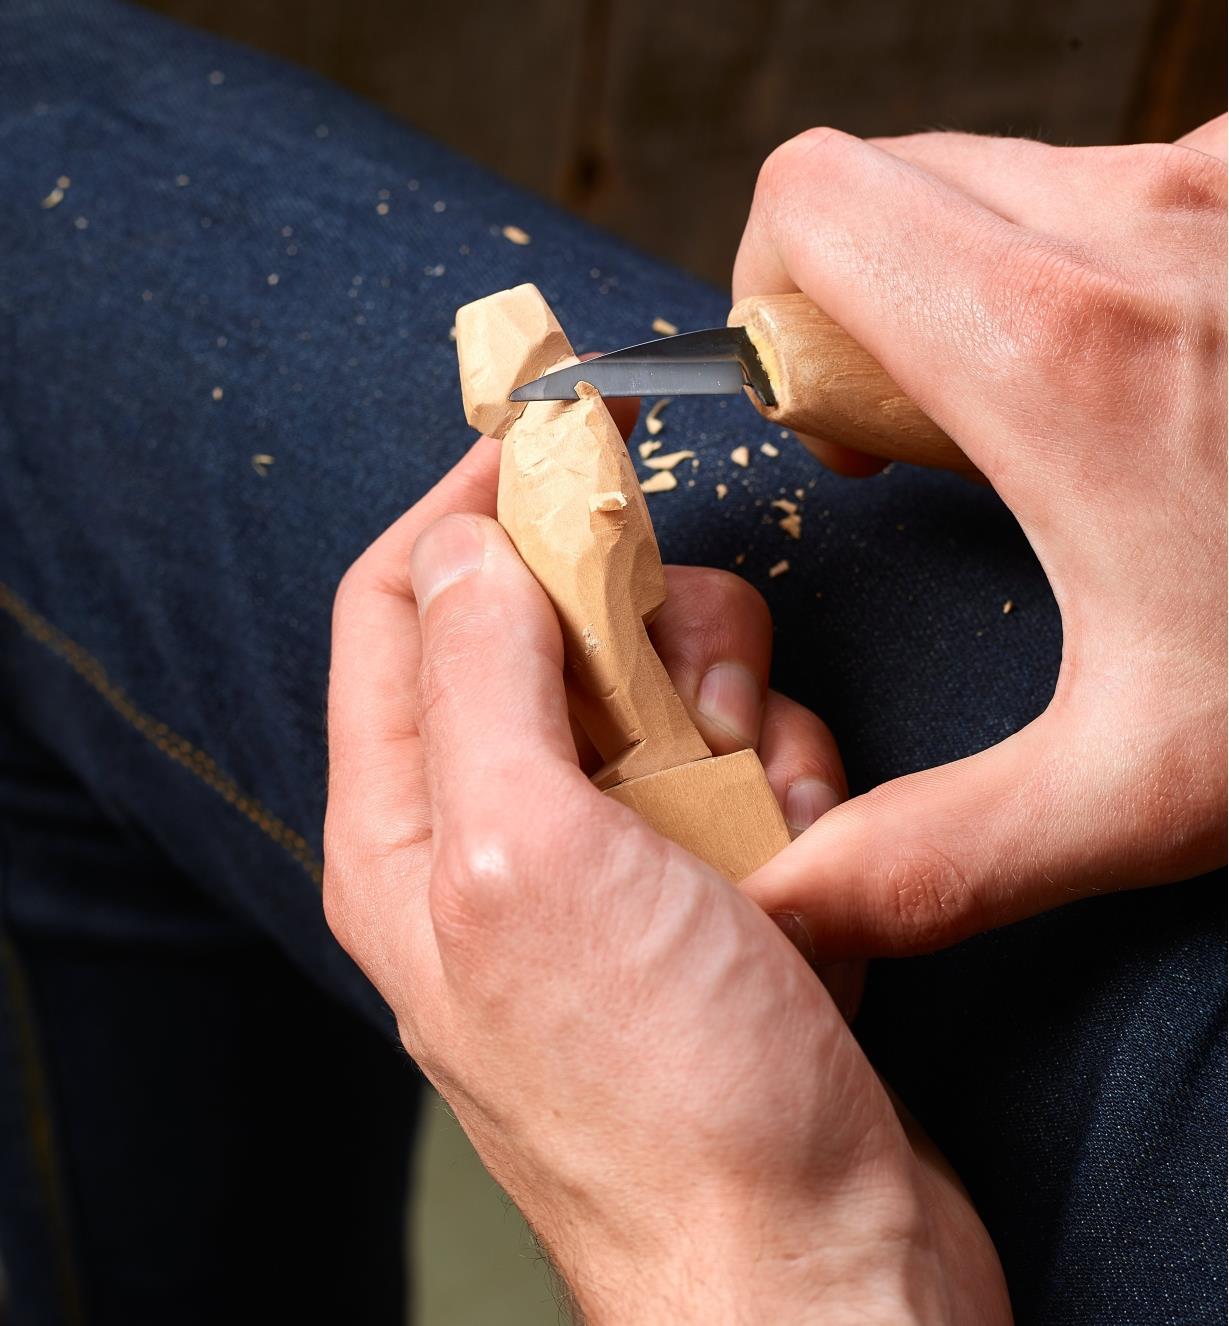 Carving a wooden statuette with a Flexcut cutting knife